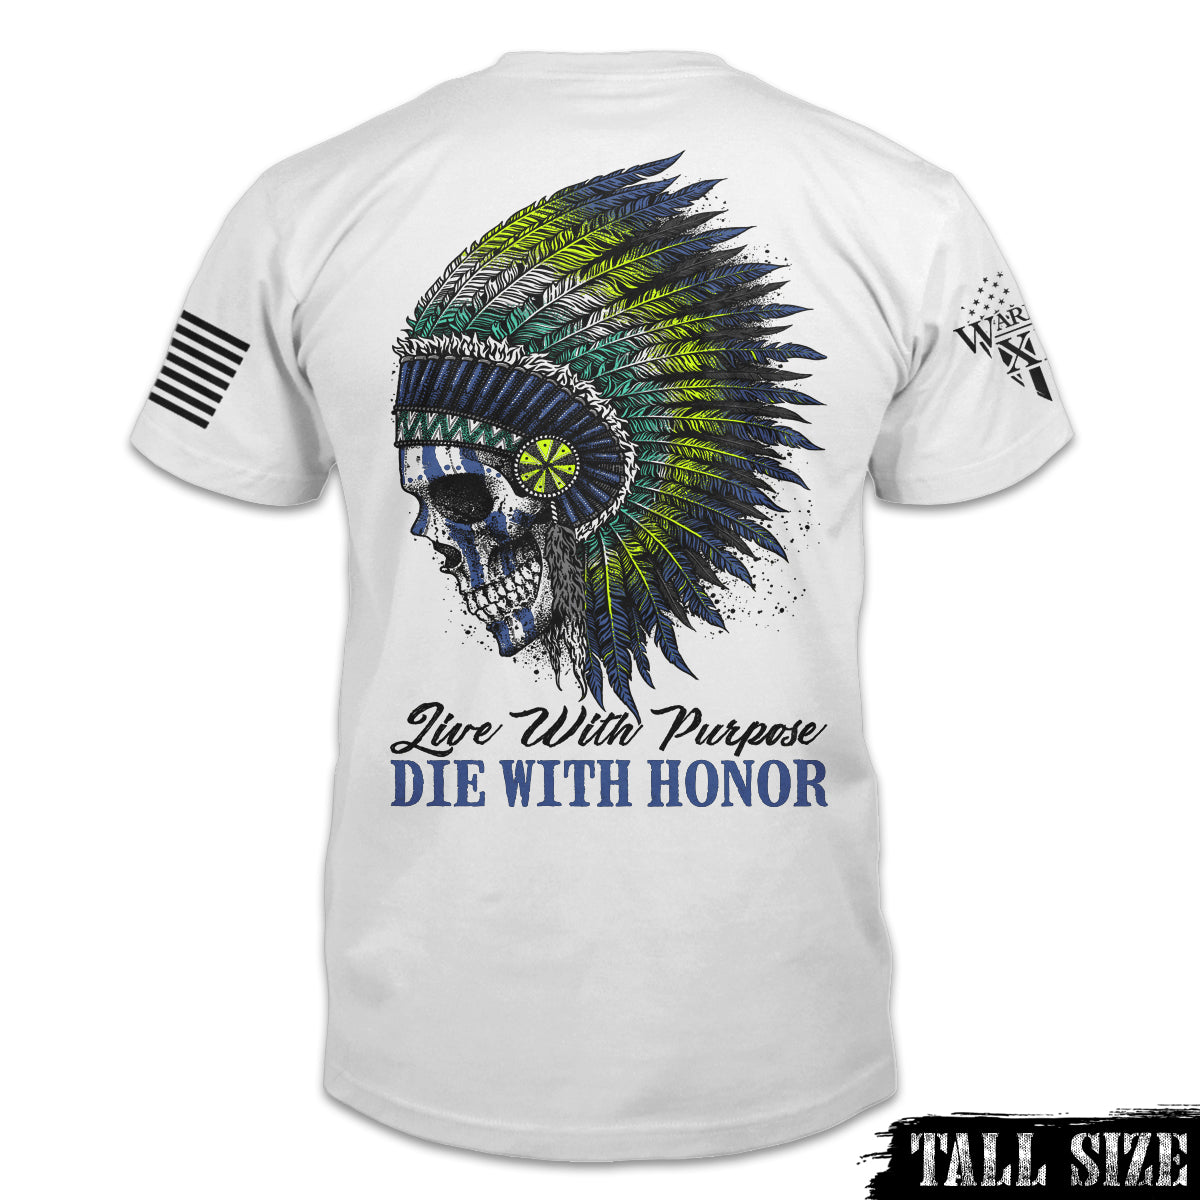 Die With Honor - Tall Size